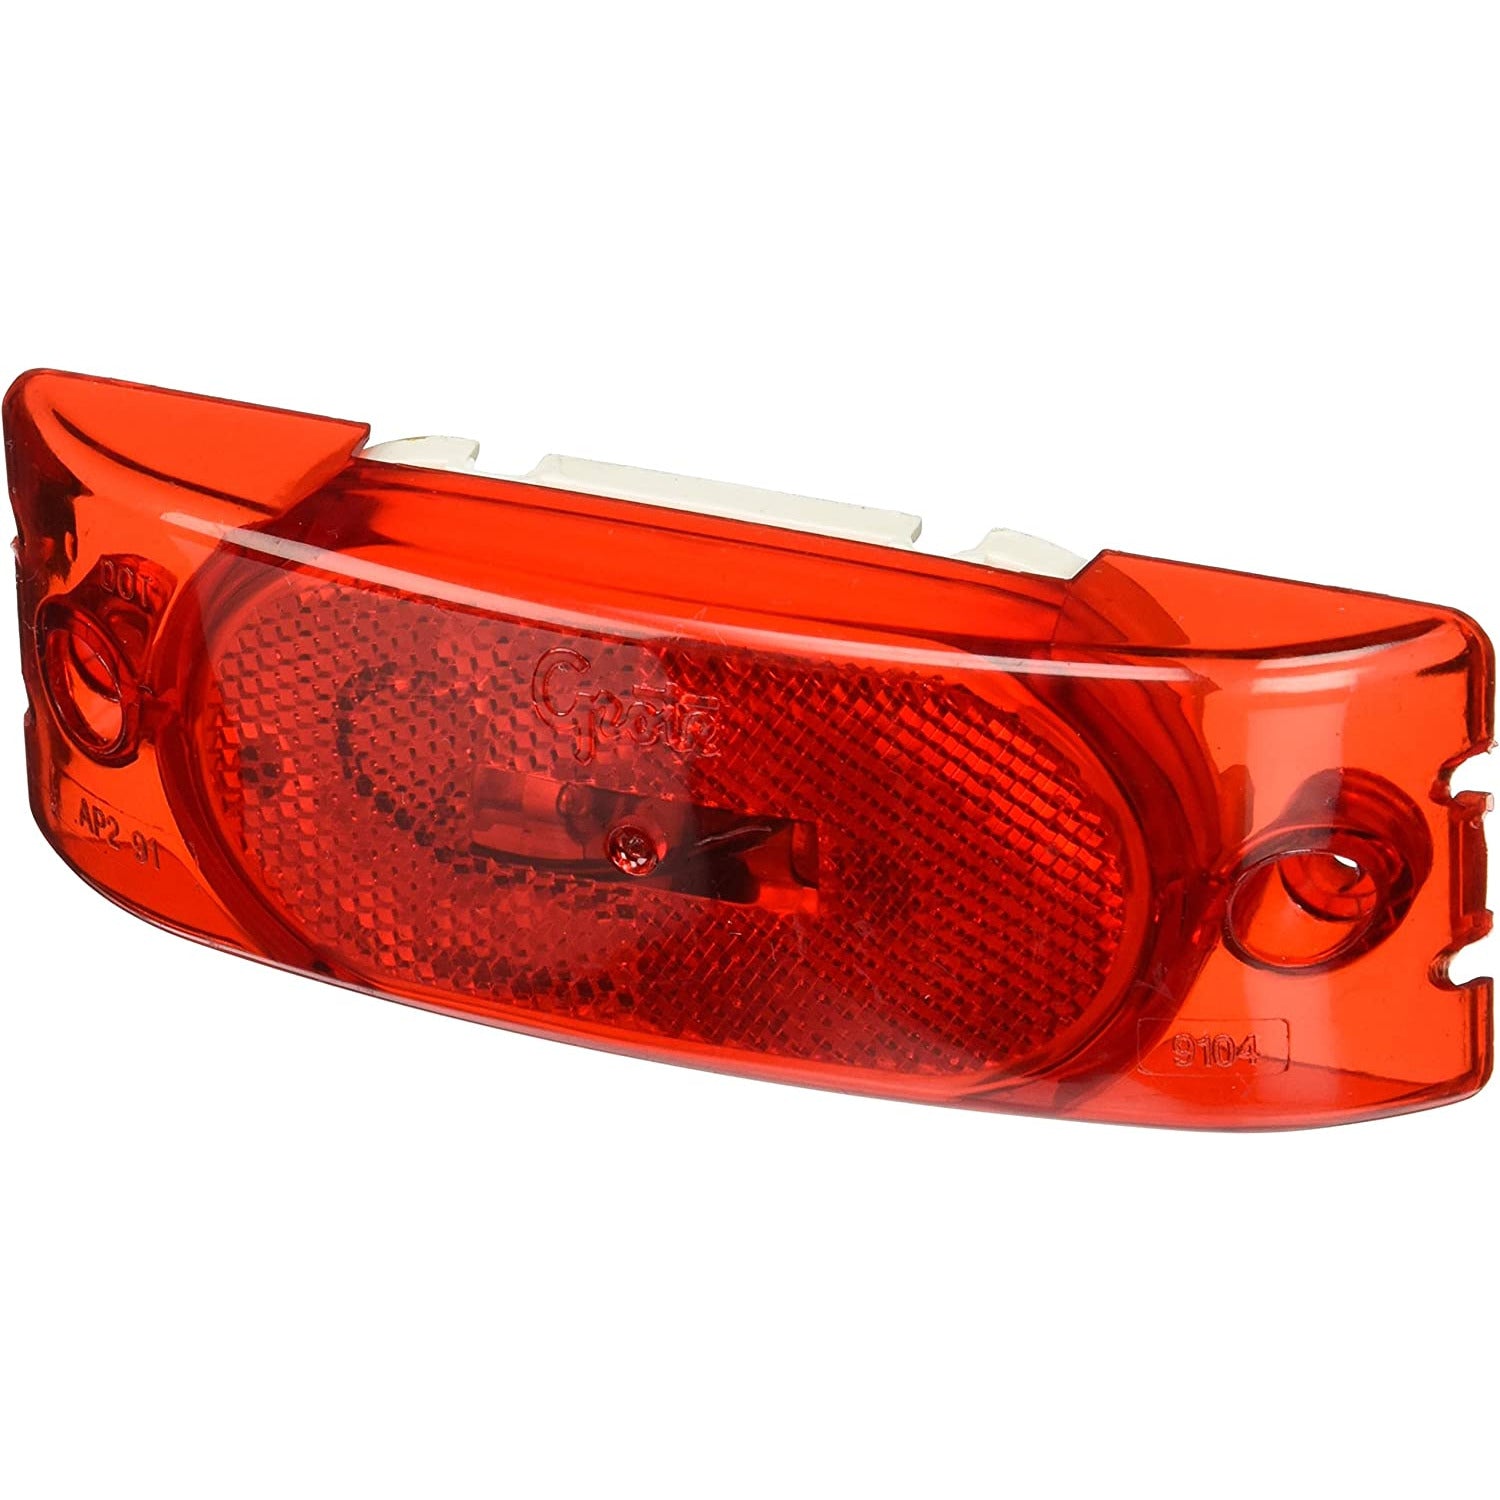 LTG 46302 Grote Two-Bulb Turtleback Rectangle Clearance Marker Light (Red, Reflective)